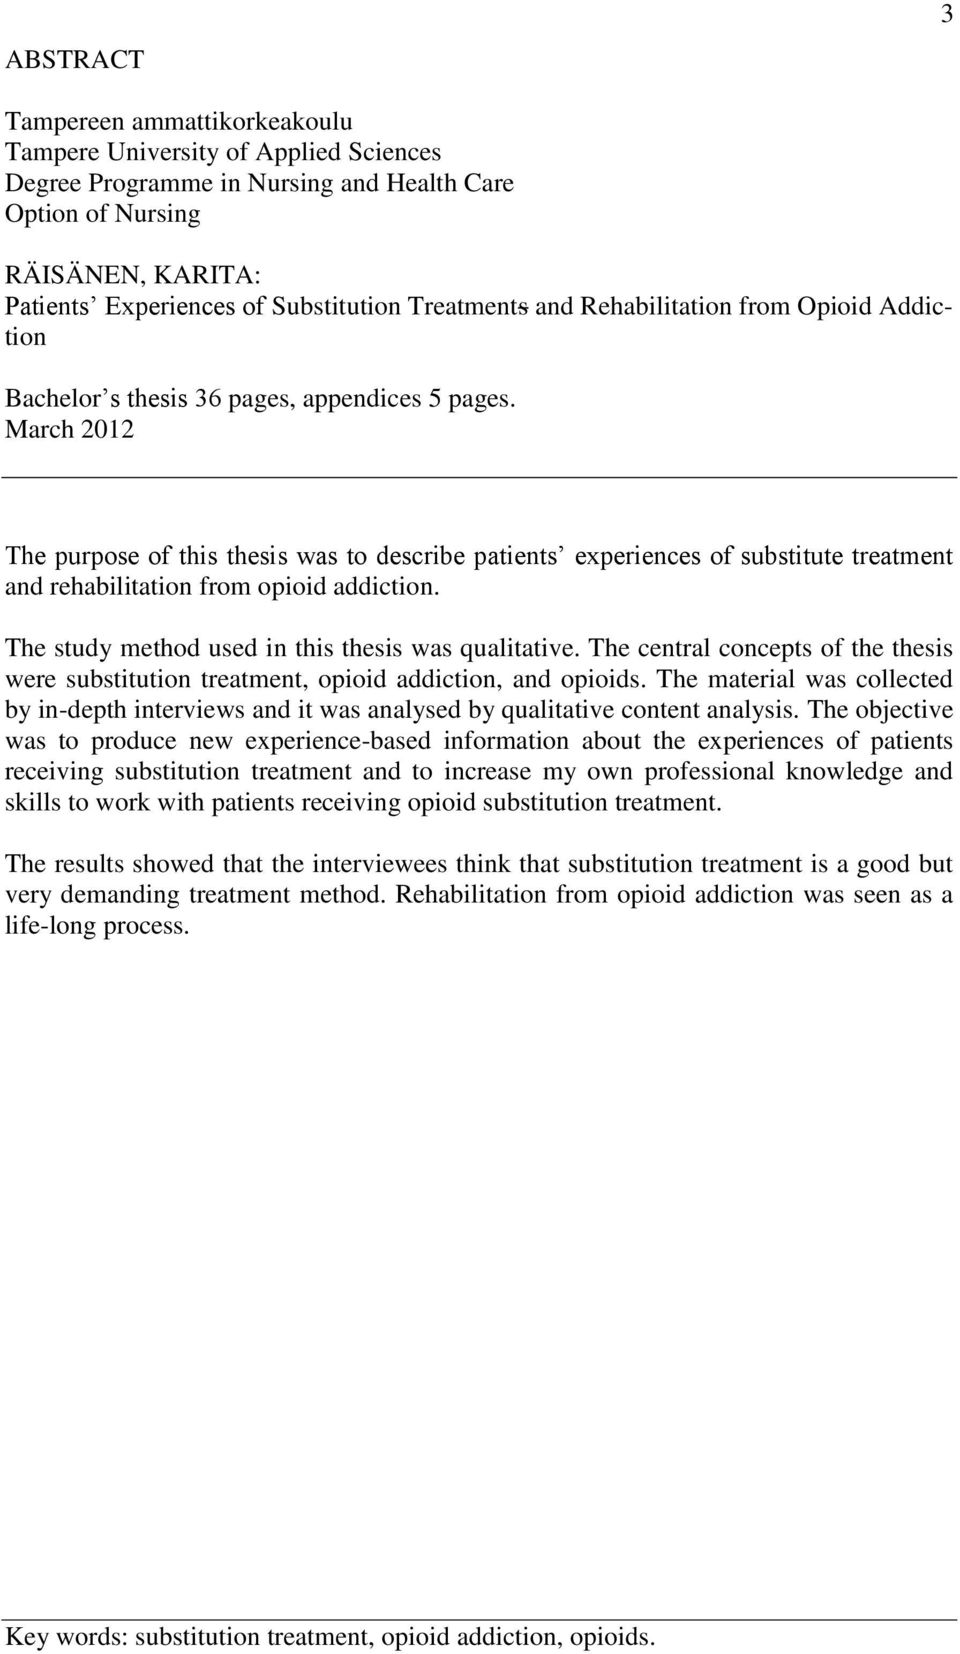 March 2012 The purpose of this thesis was to describe patients experiences of substitute treatment and rehabilitation from opioid addiction. The study method used in this thesis was qualitative.